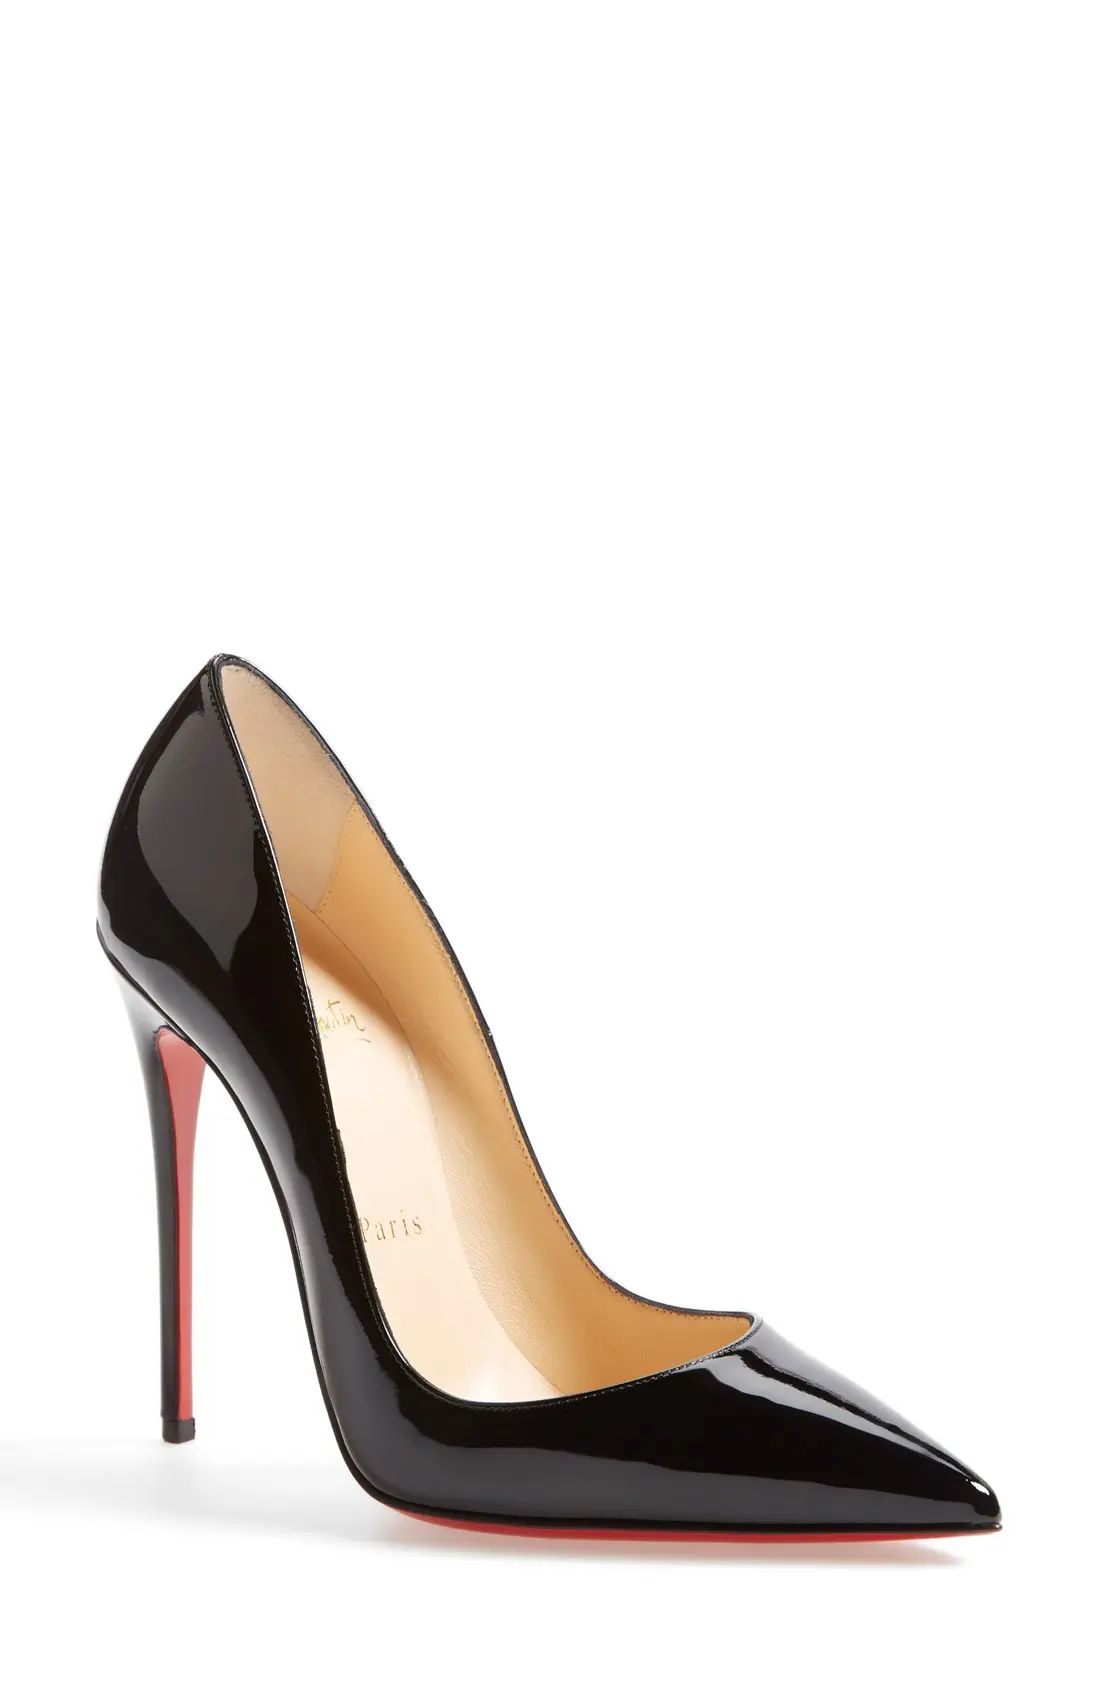 Christian Louboutin So Kate Pointed Toe Pump, Size 12Us in Black at Nordstrom | Nordstrom